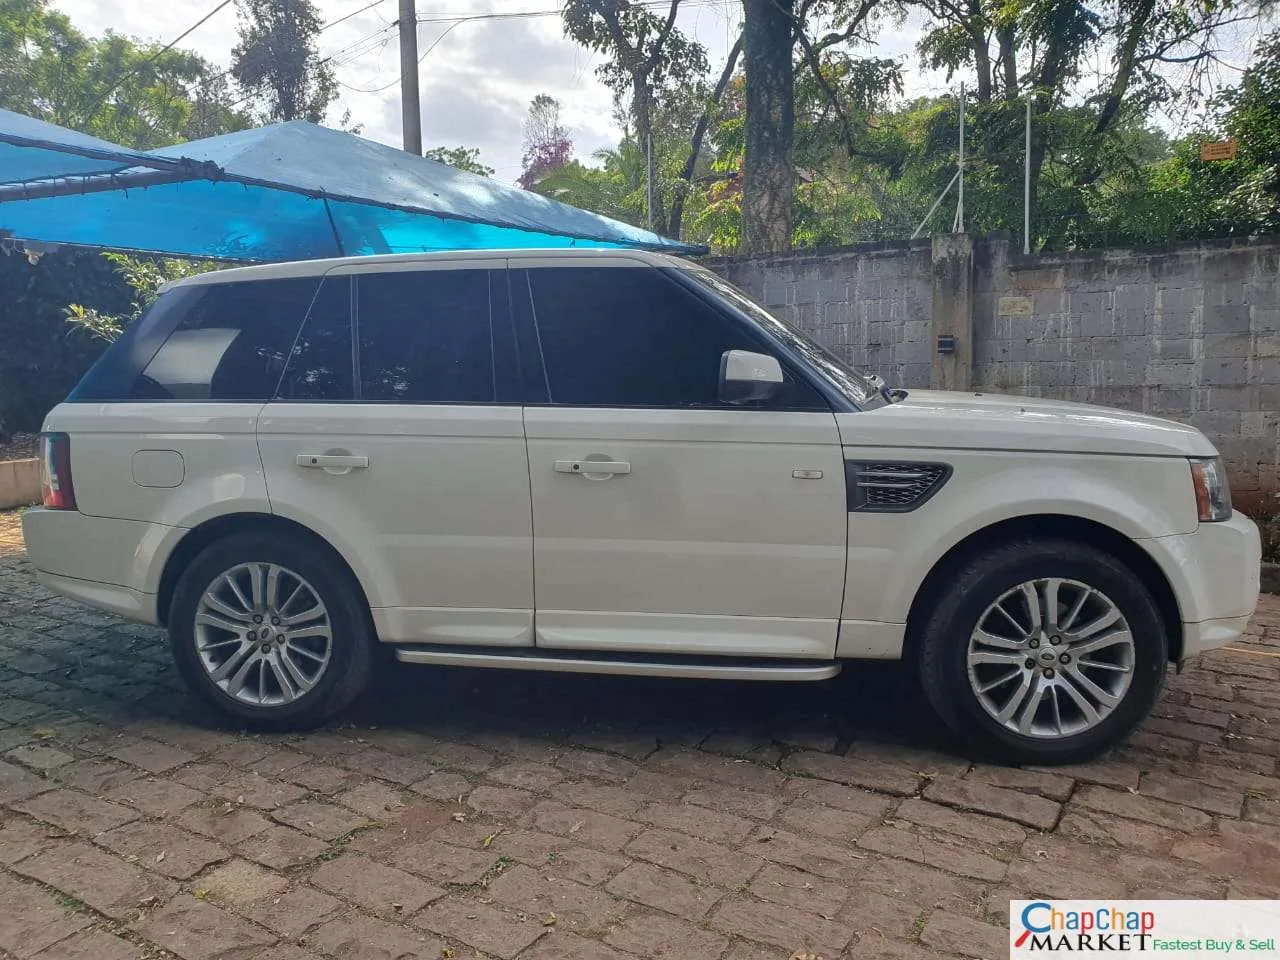 Range Rover Sport kenya Asian owner CHEAPEST You pay 30% deposit Trade in OK sport for sale in kenya hire purchase installments EXCLUSIVE